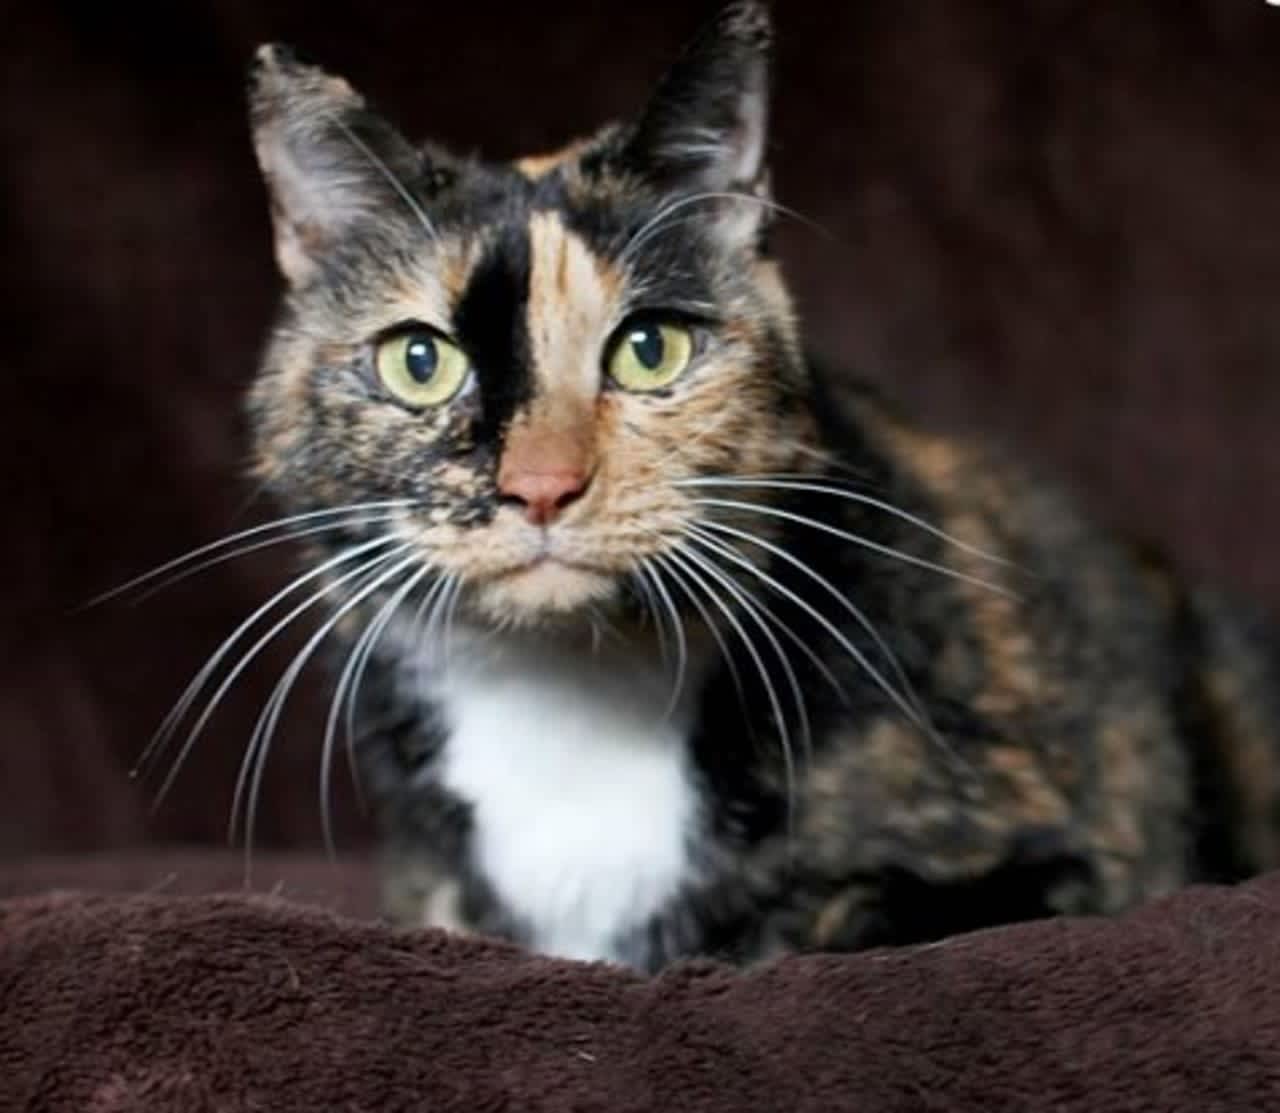 Mama is "Pet of the Week" at the Hi Tor Animal Care Center in Pomona. The 10-year-old calico kitty would do best in a quiet home with mature and calm feline companions.